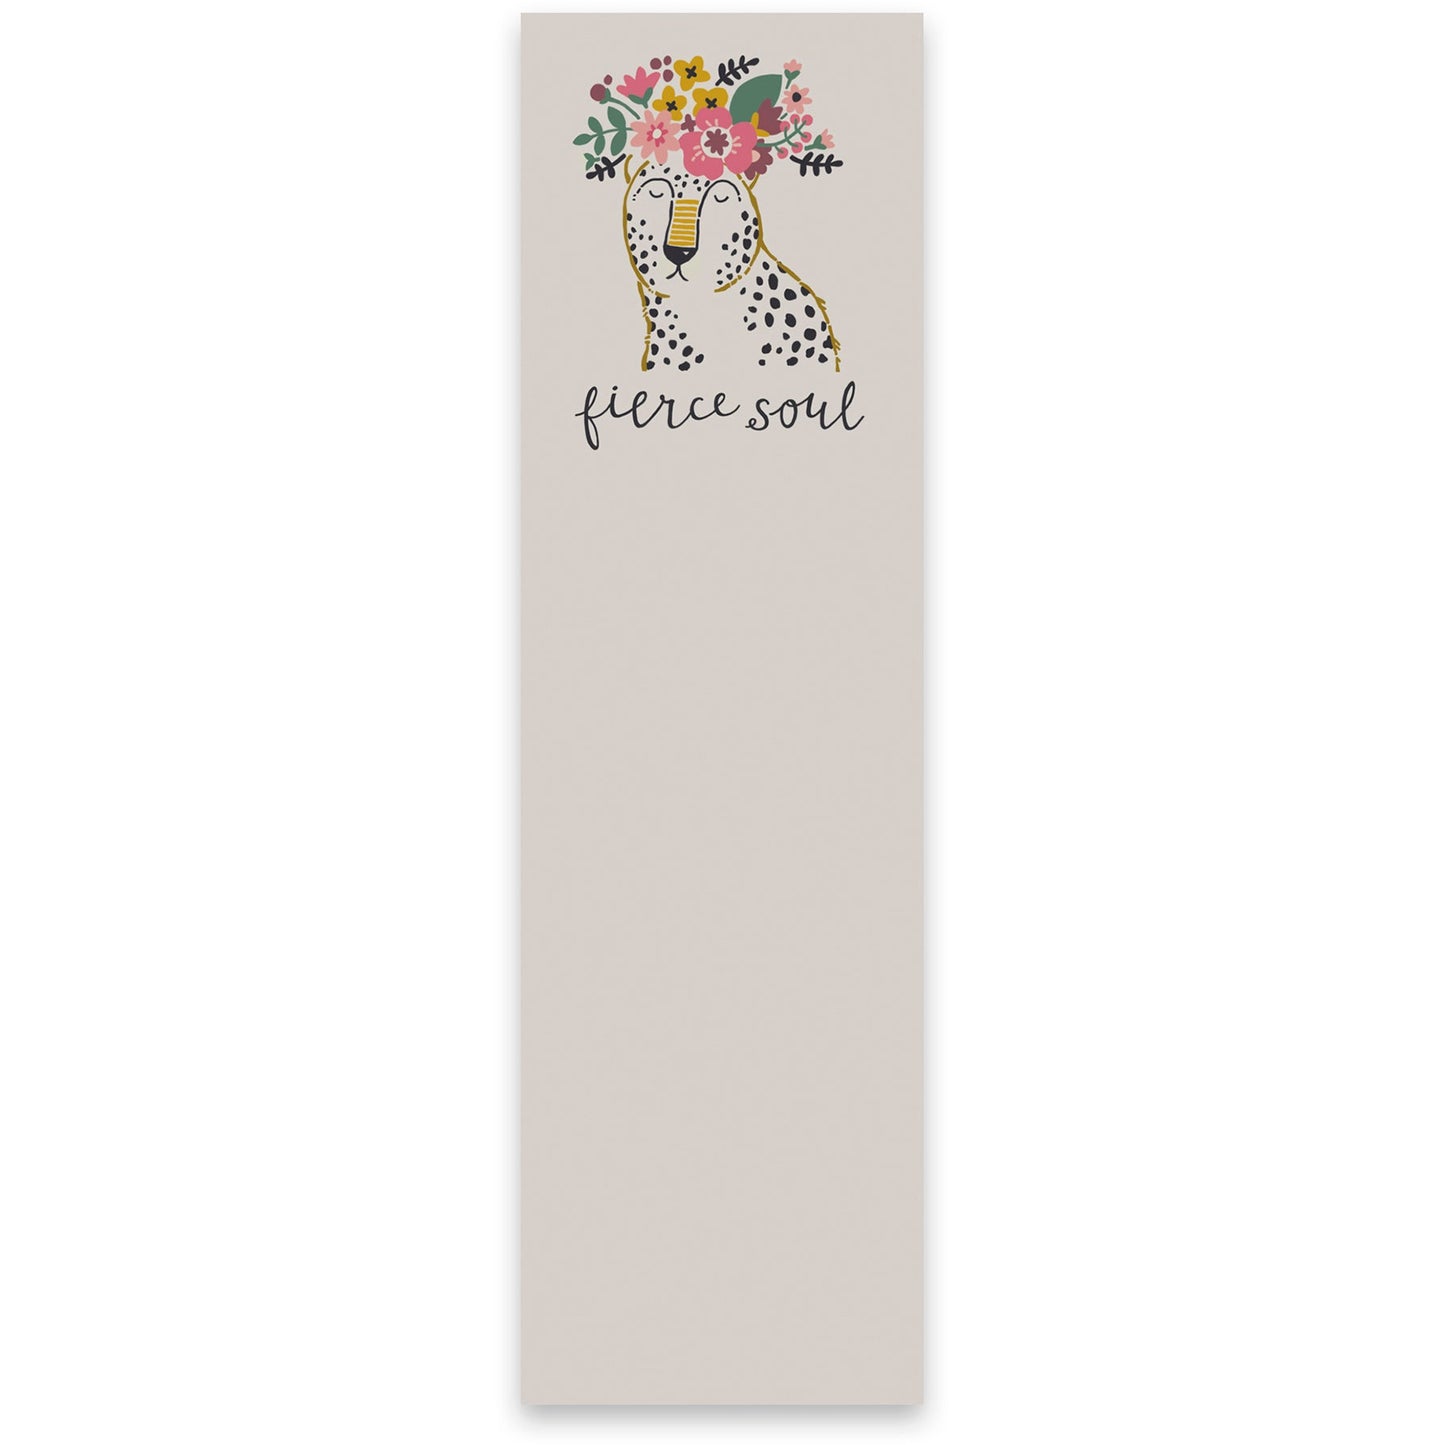 Fierce Soul Cheetah With Floral Crown Design List Notepad | 9.5" x 2.75" | Holds to Fridge with Strong Magnet